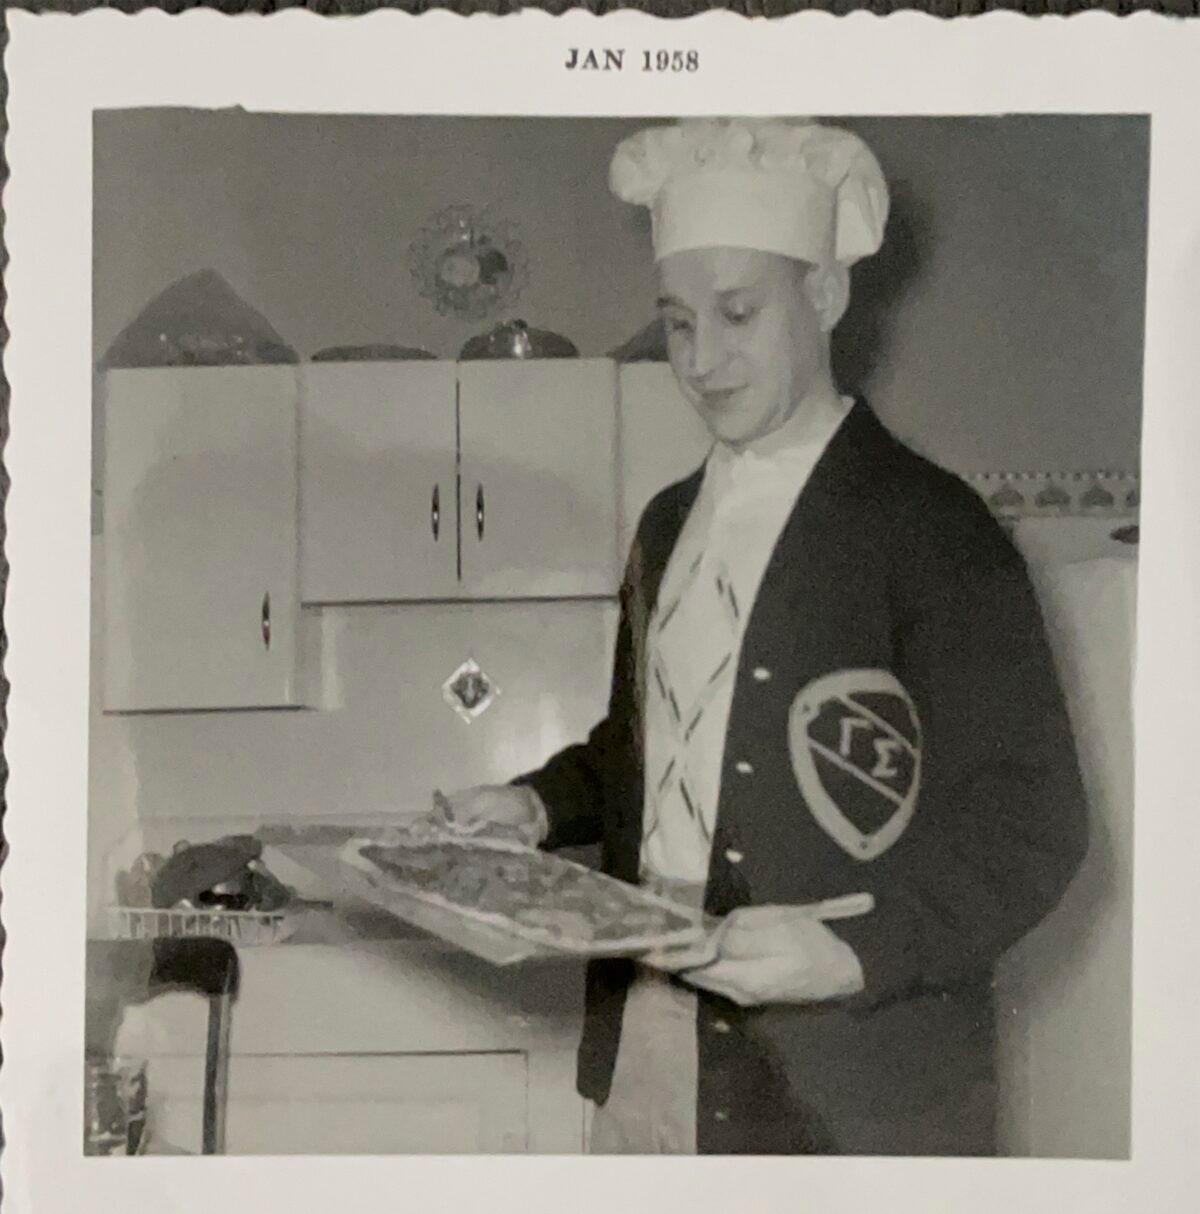 The author's father, Frank Stofan, shortly after his marriage. He loved to cook. (Courtesy of Mary Lou Young)